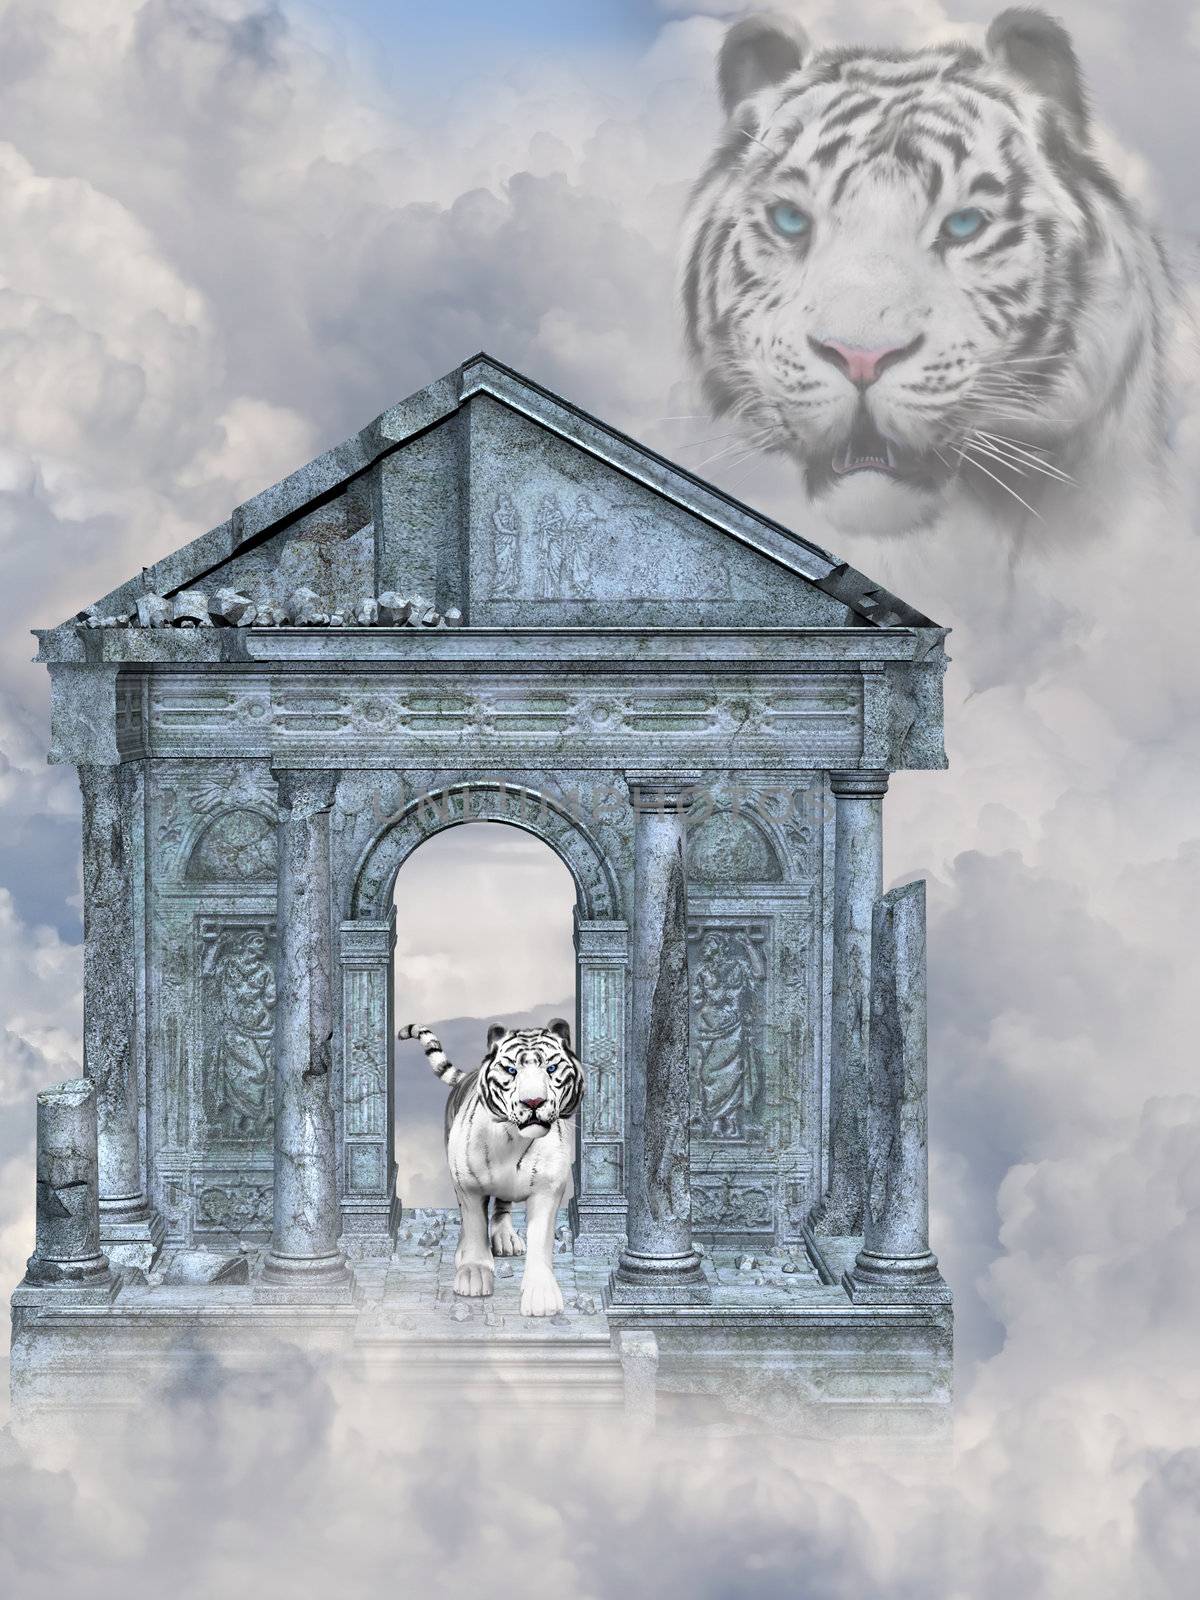 the white tiger guarding the holy temple